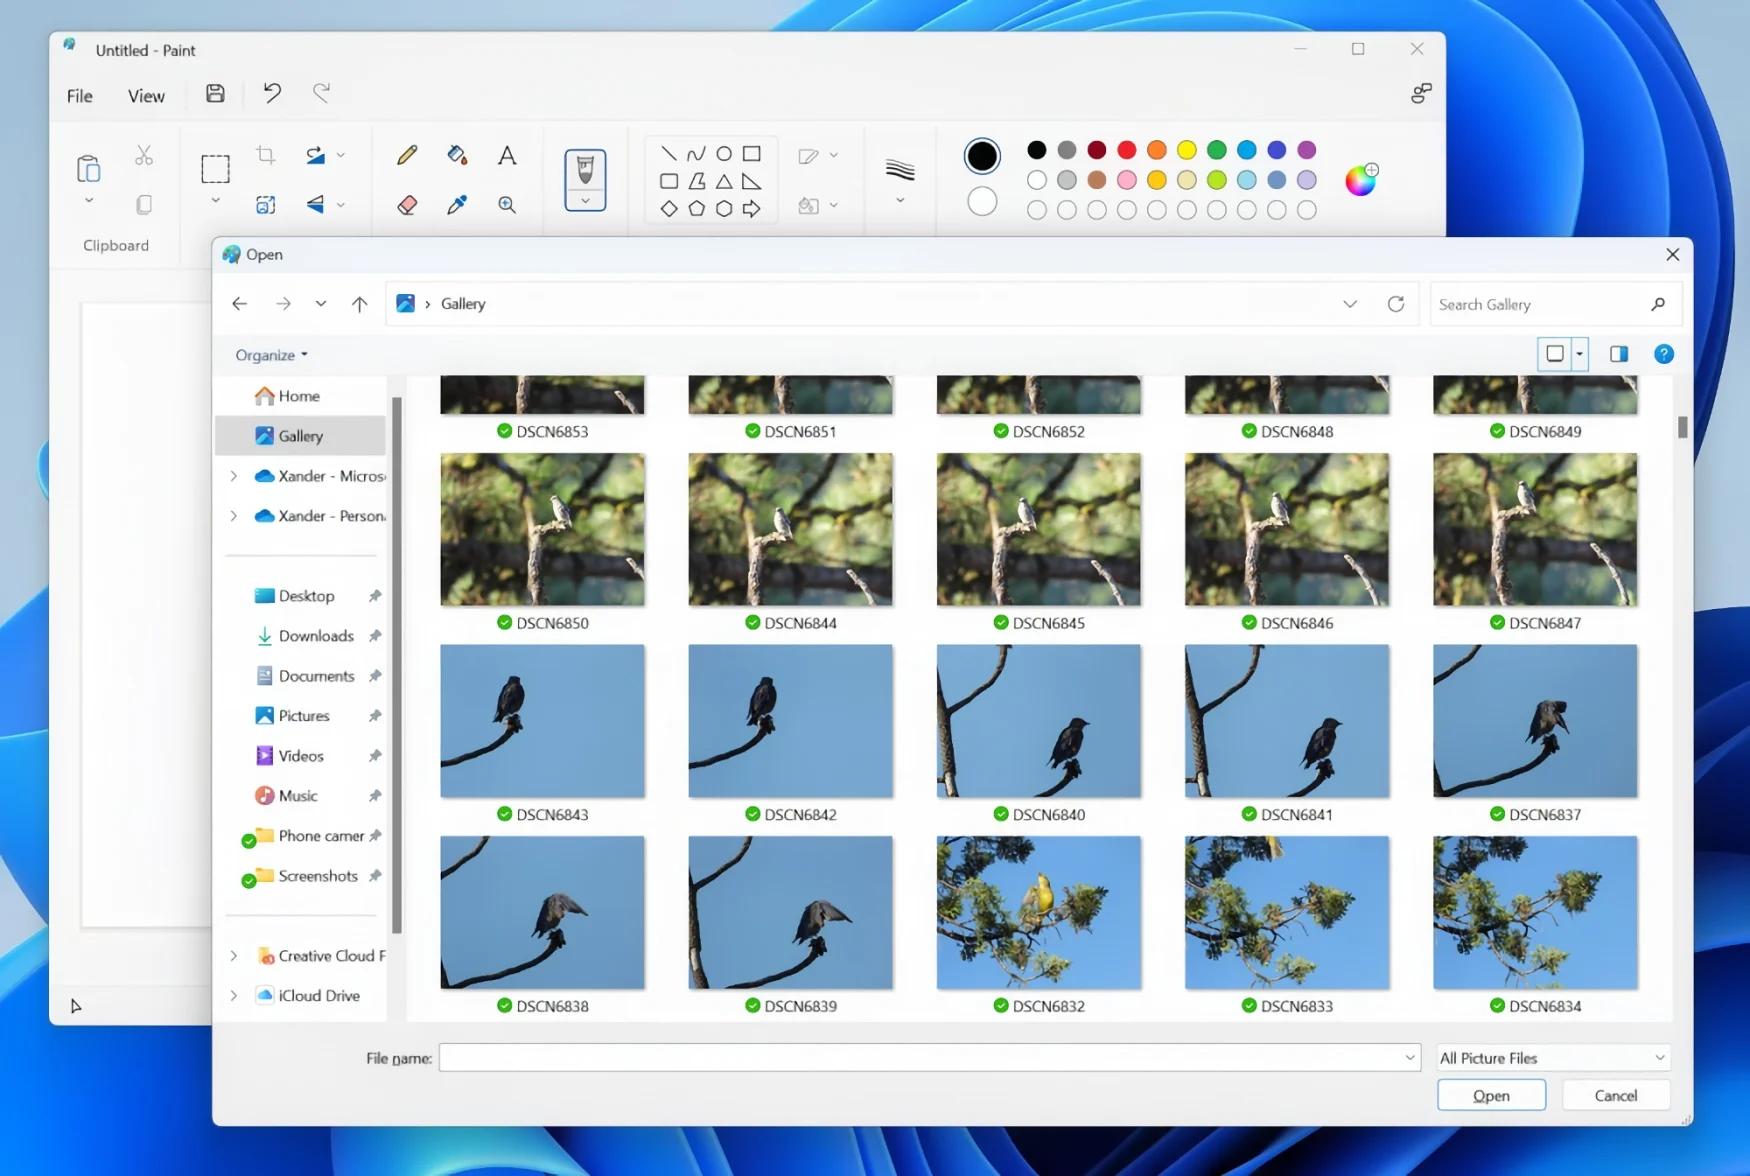 Screenshot of the Windows 11 file picker, showing the Gallery highlighted in the navigation panel (left side of Explorer window), with an array of image thumbnails in the main window. Microsoft Paint (the app calling up the file-picker) is open behind the picker window.